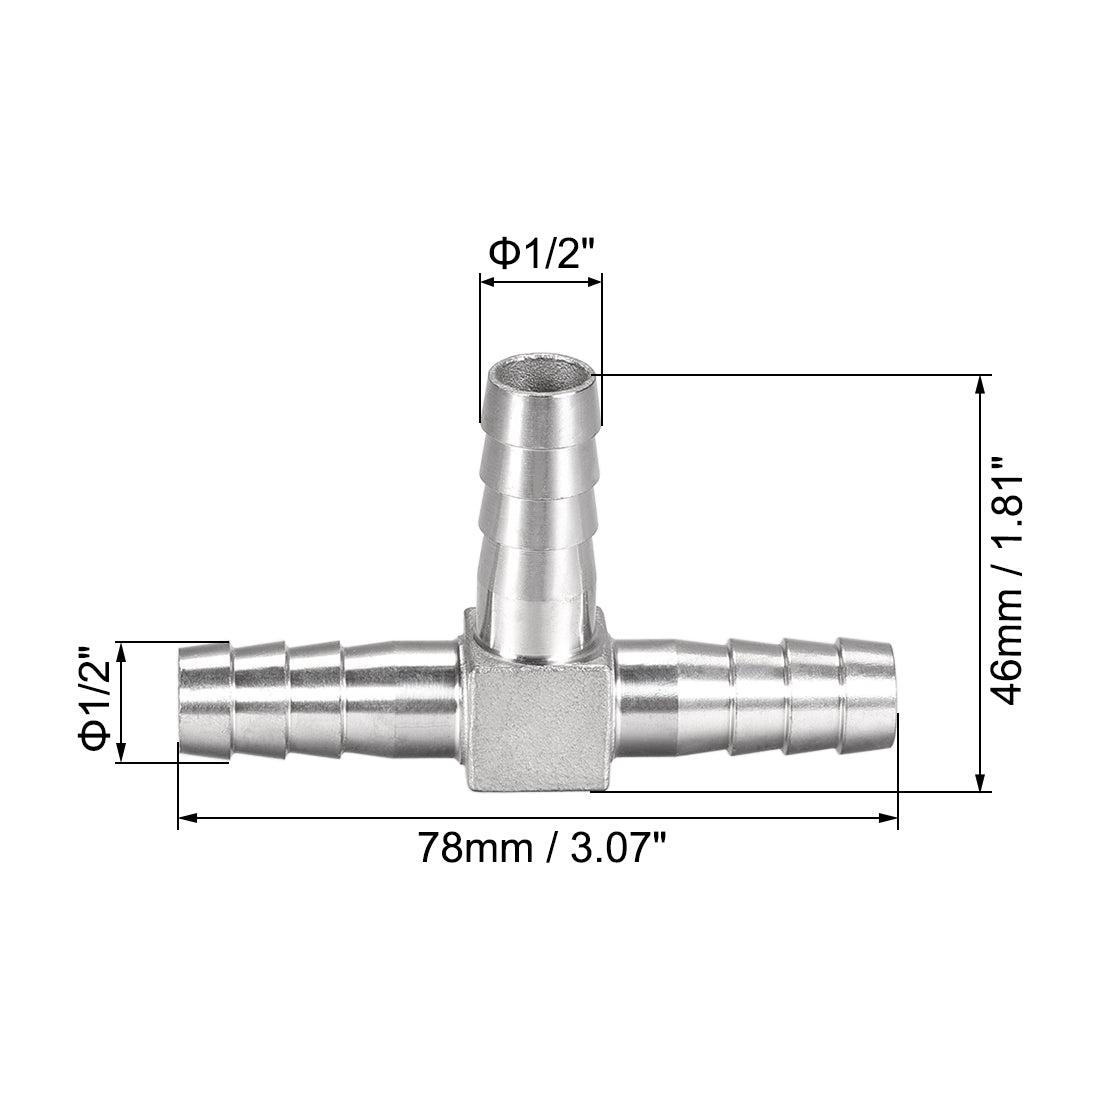 uxcell Uxcell 1/2-Inch (13mm) Hose ID Barb Fitting Stainless Steel 3 Way T Shaped Union Home Brew Fitting